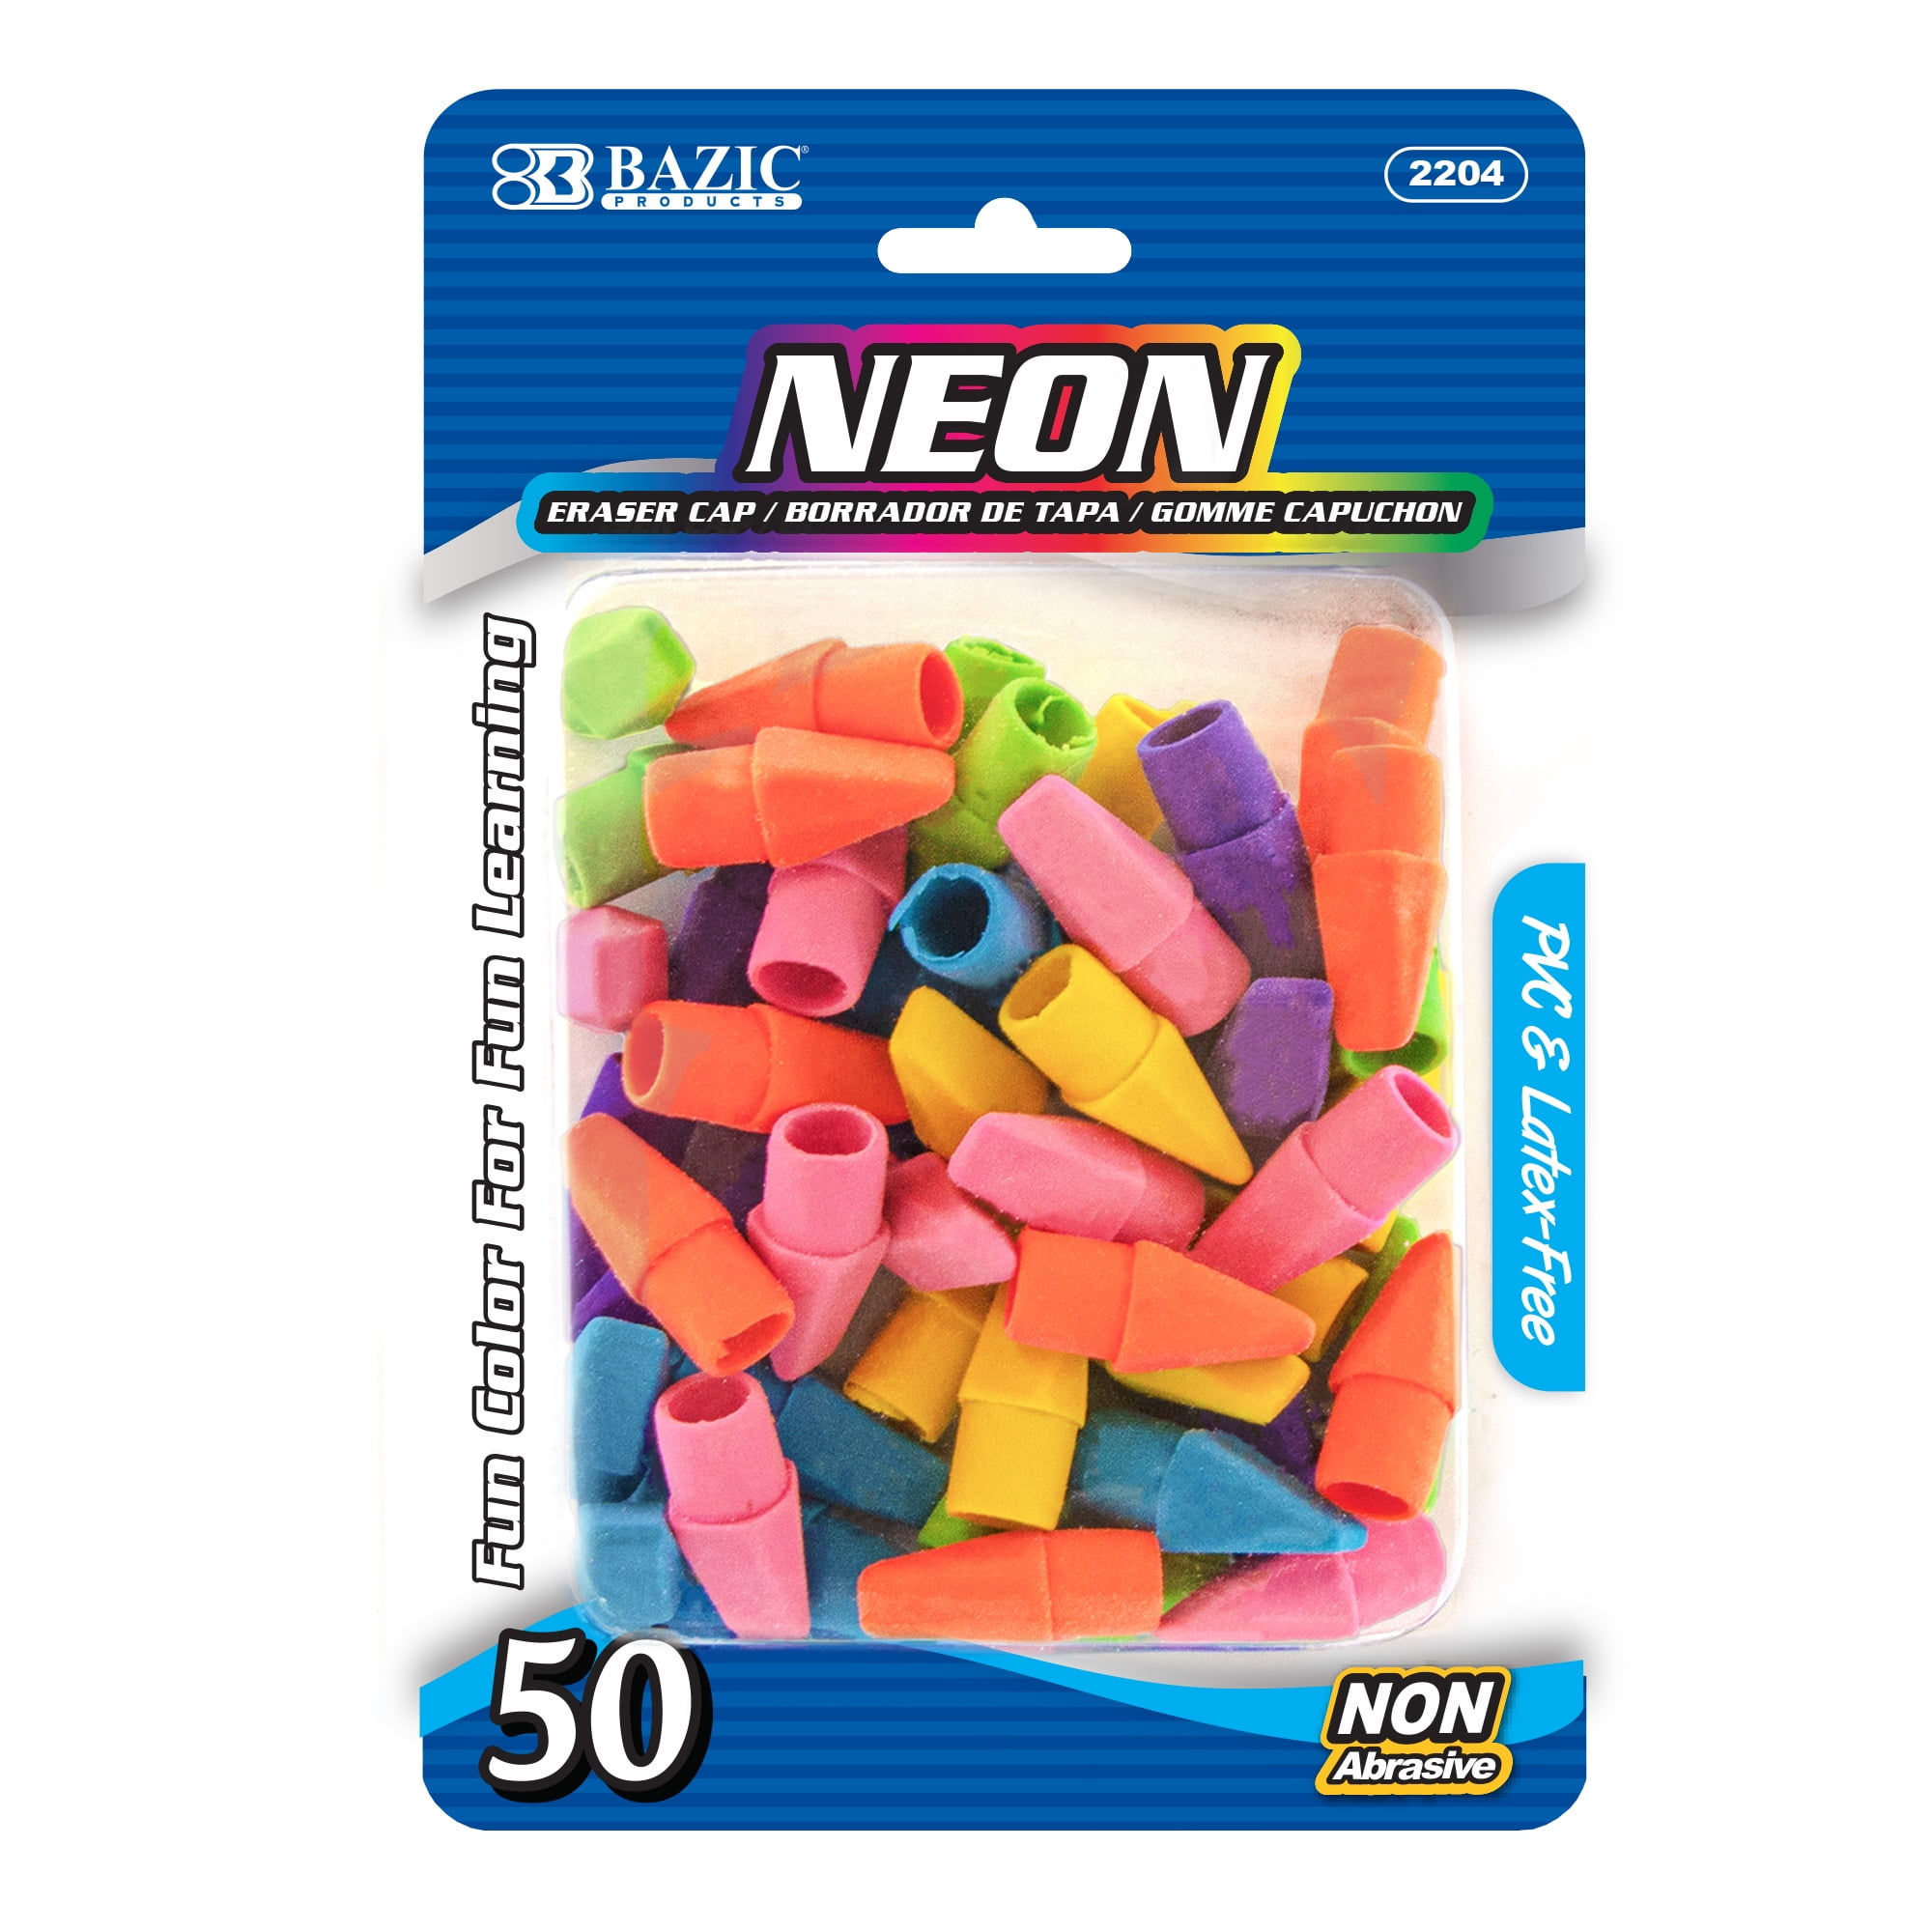 New Reward Erasers Words Erasers 20 CT Great for Teacher Kids School Learning 